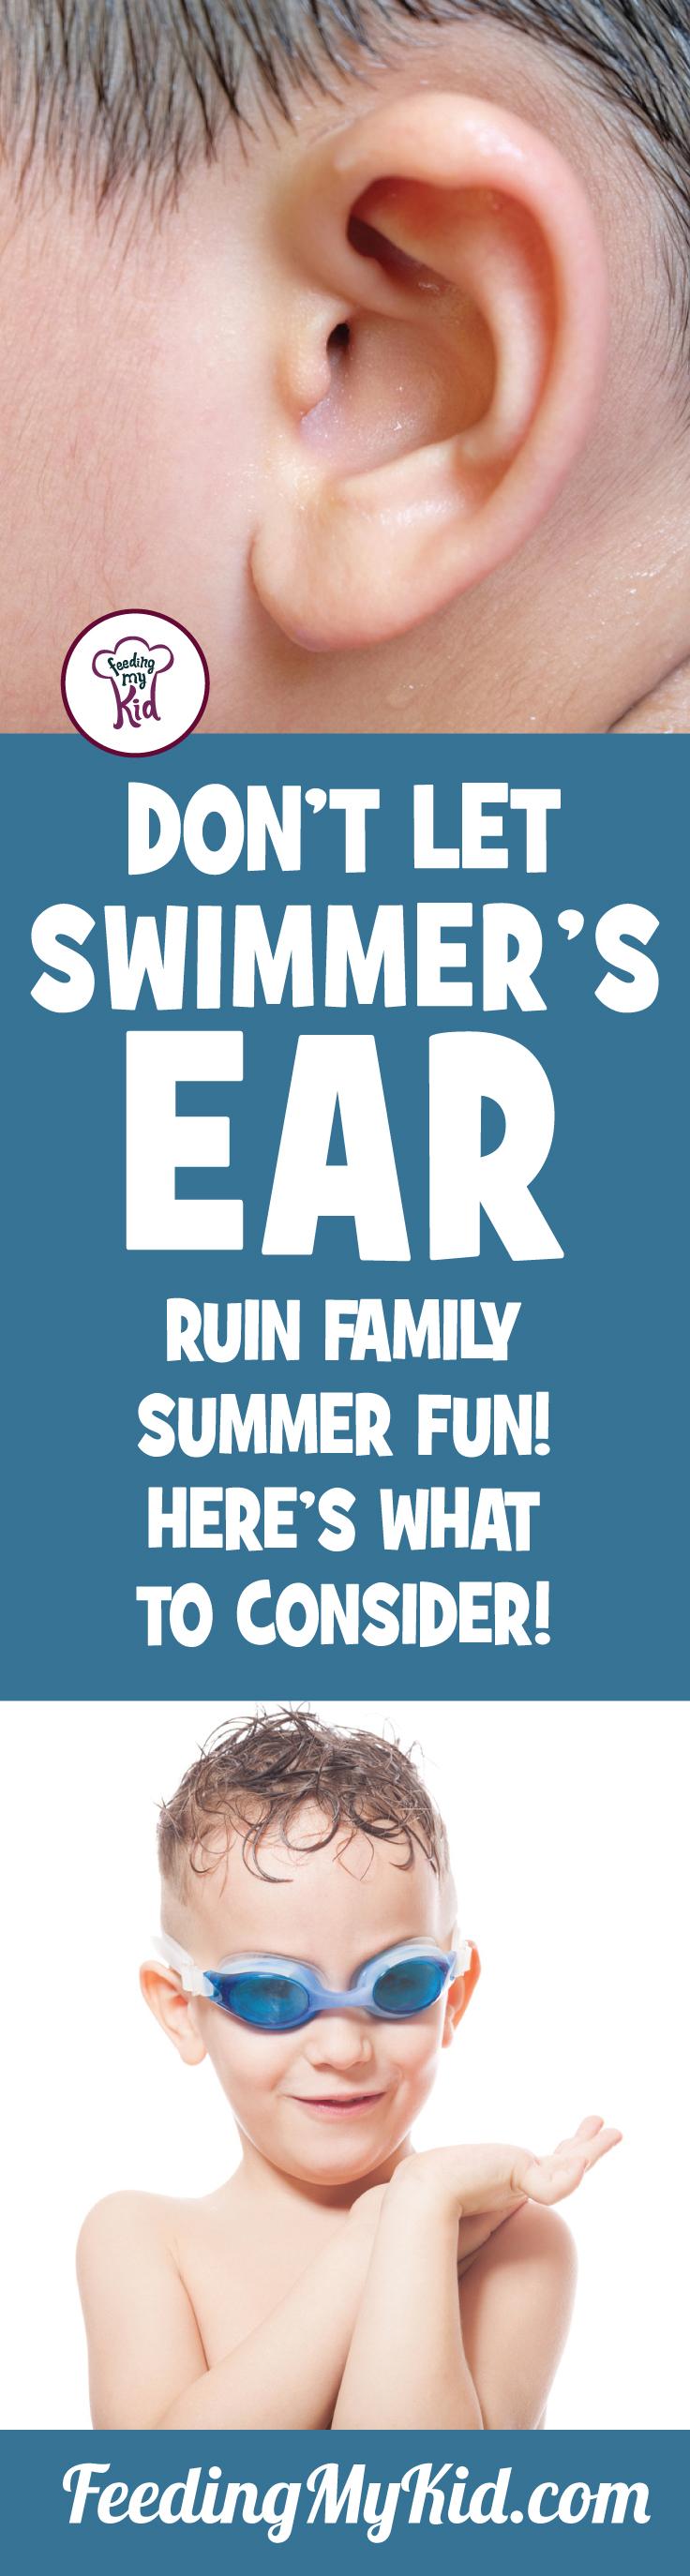 Don't Let Swimmer’s Ear Ruin Family Summer Fun! Here's What To Consider!